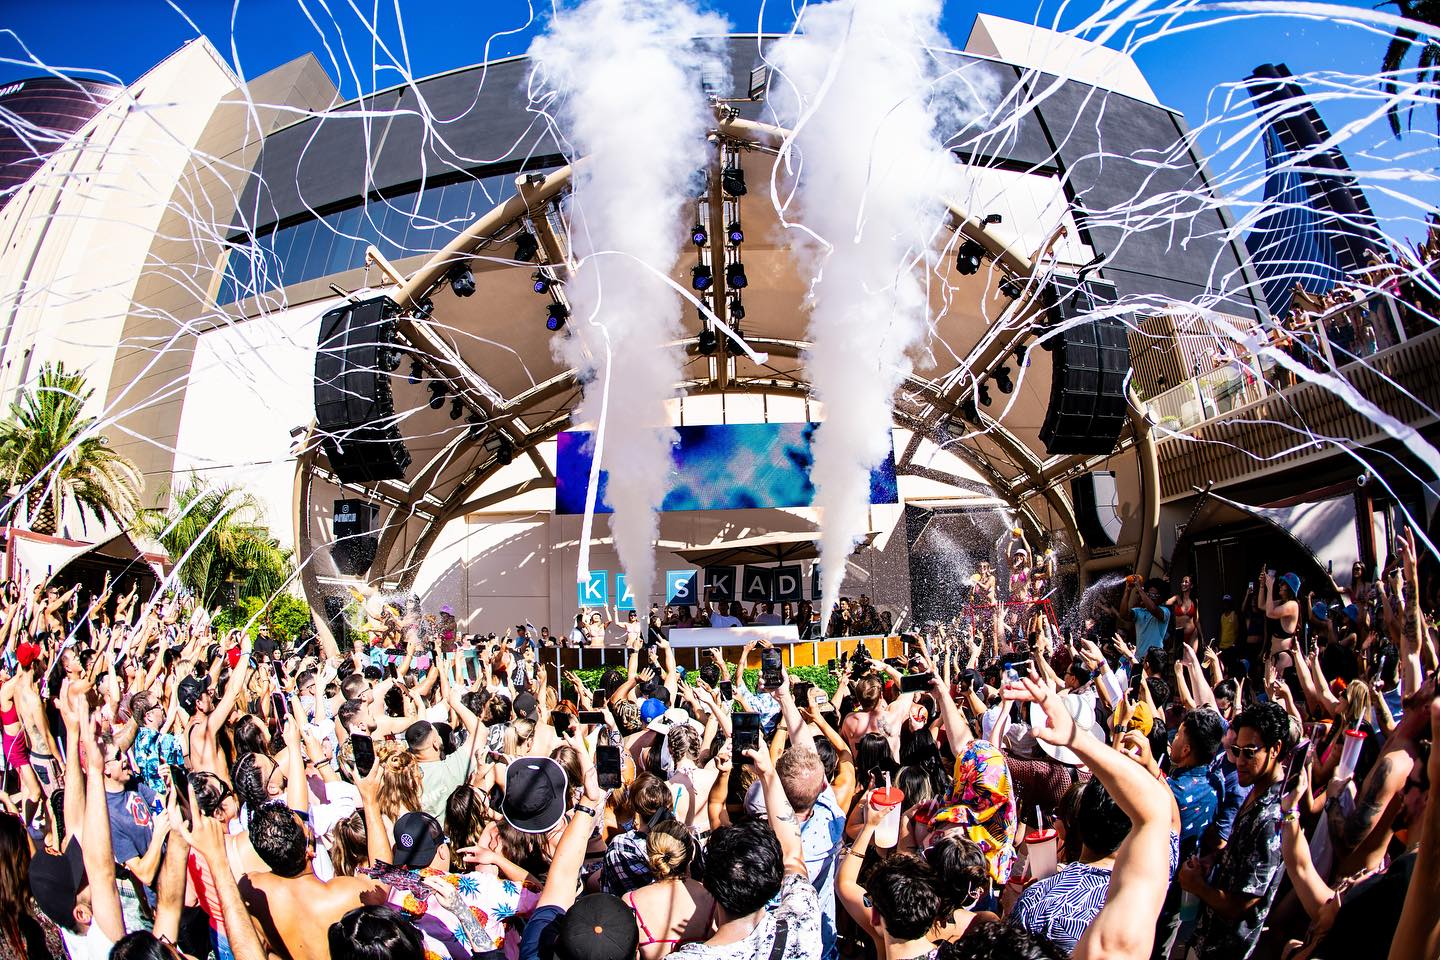 10 Of The Best Pool Parties And Day Clubs in Las Vegas